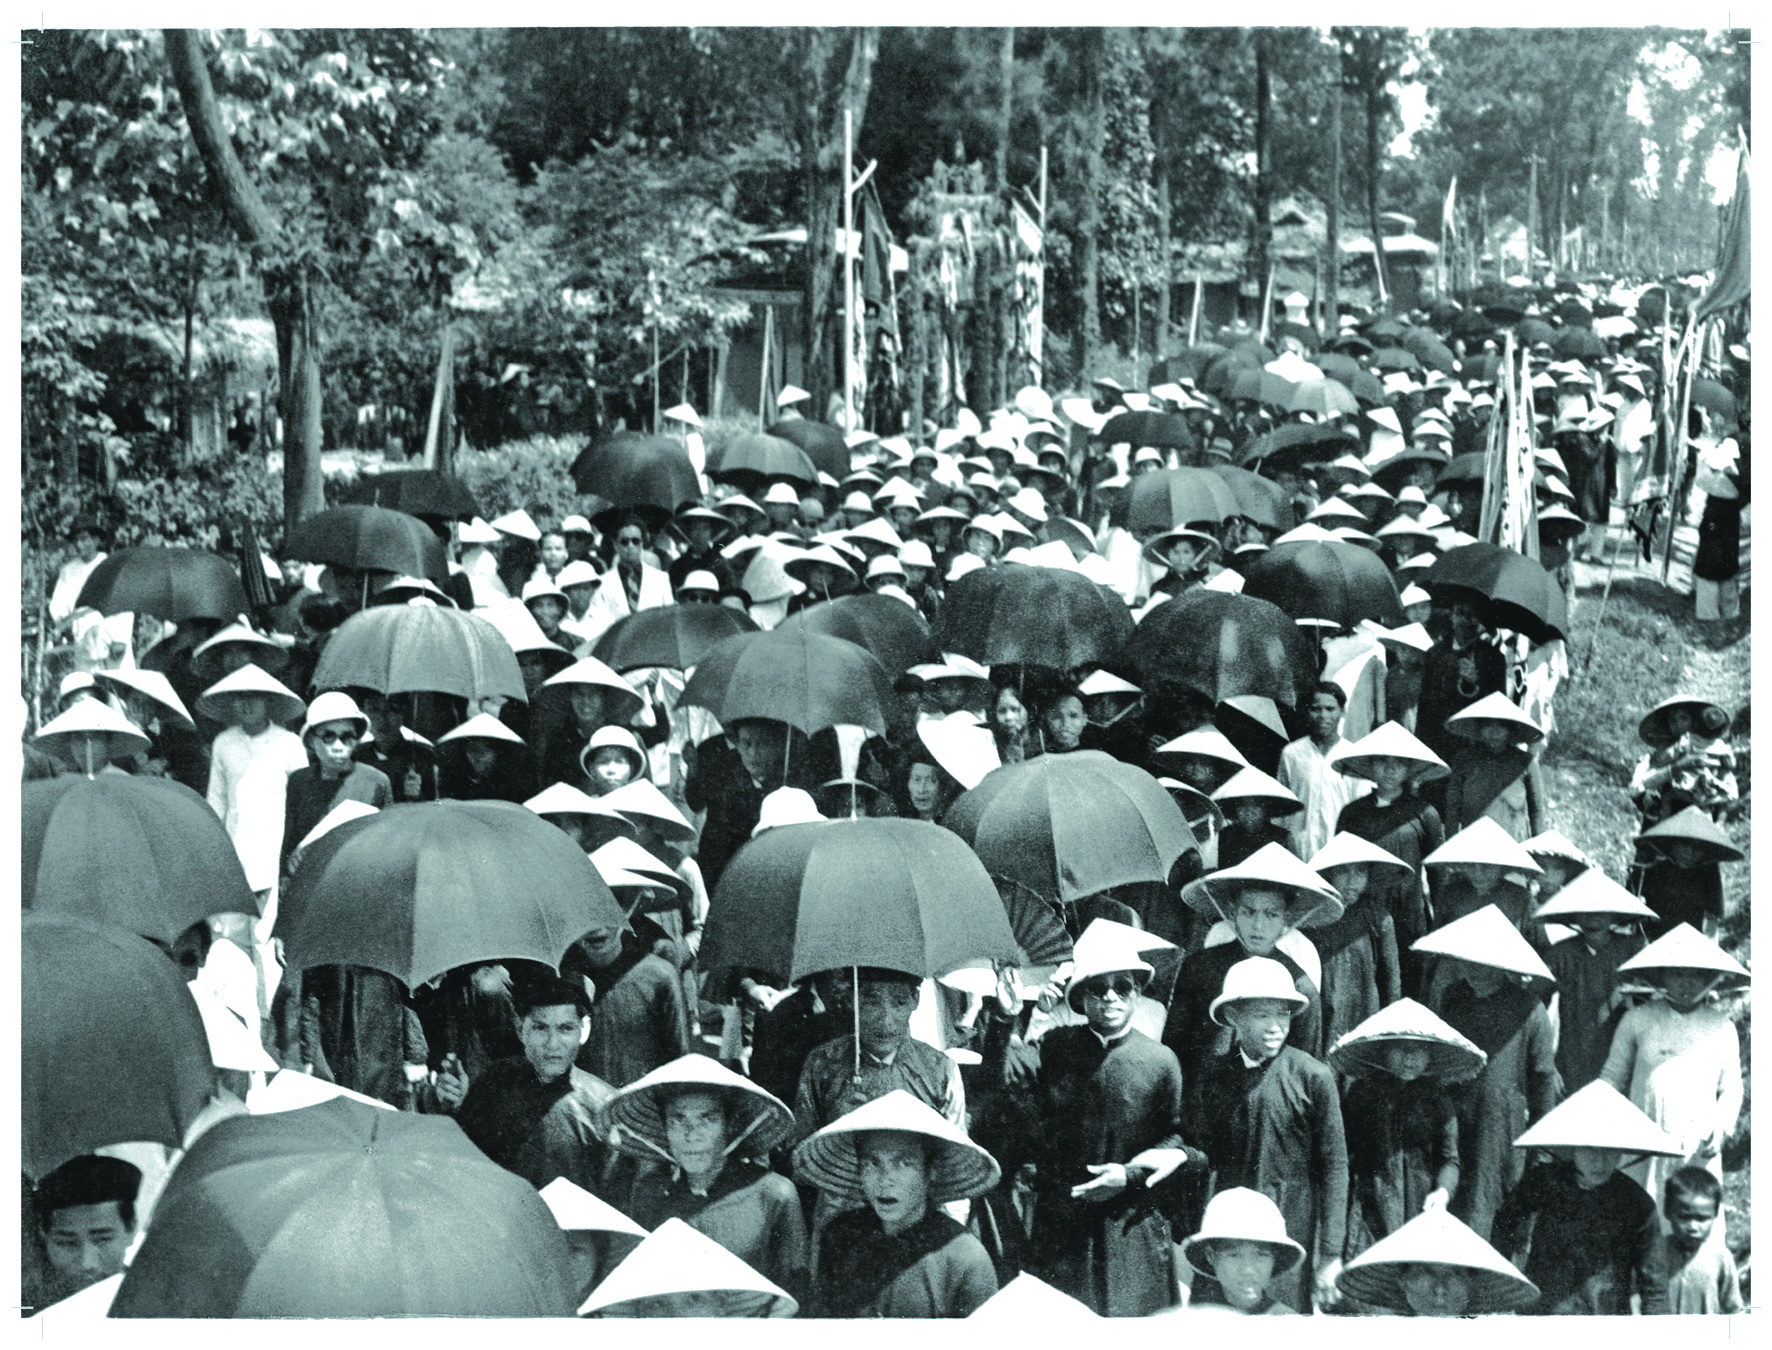 A crowd following the Nam Giao Offering Ritual